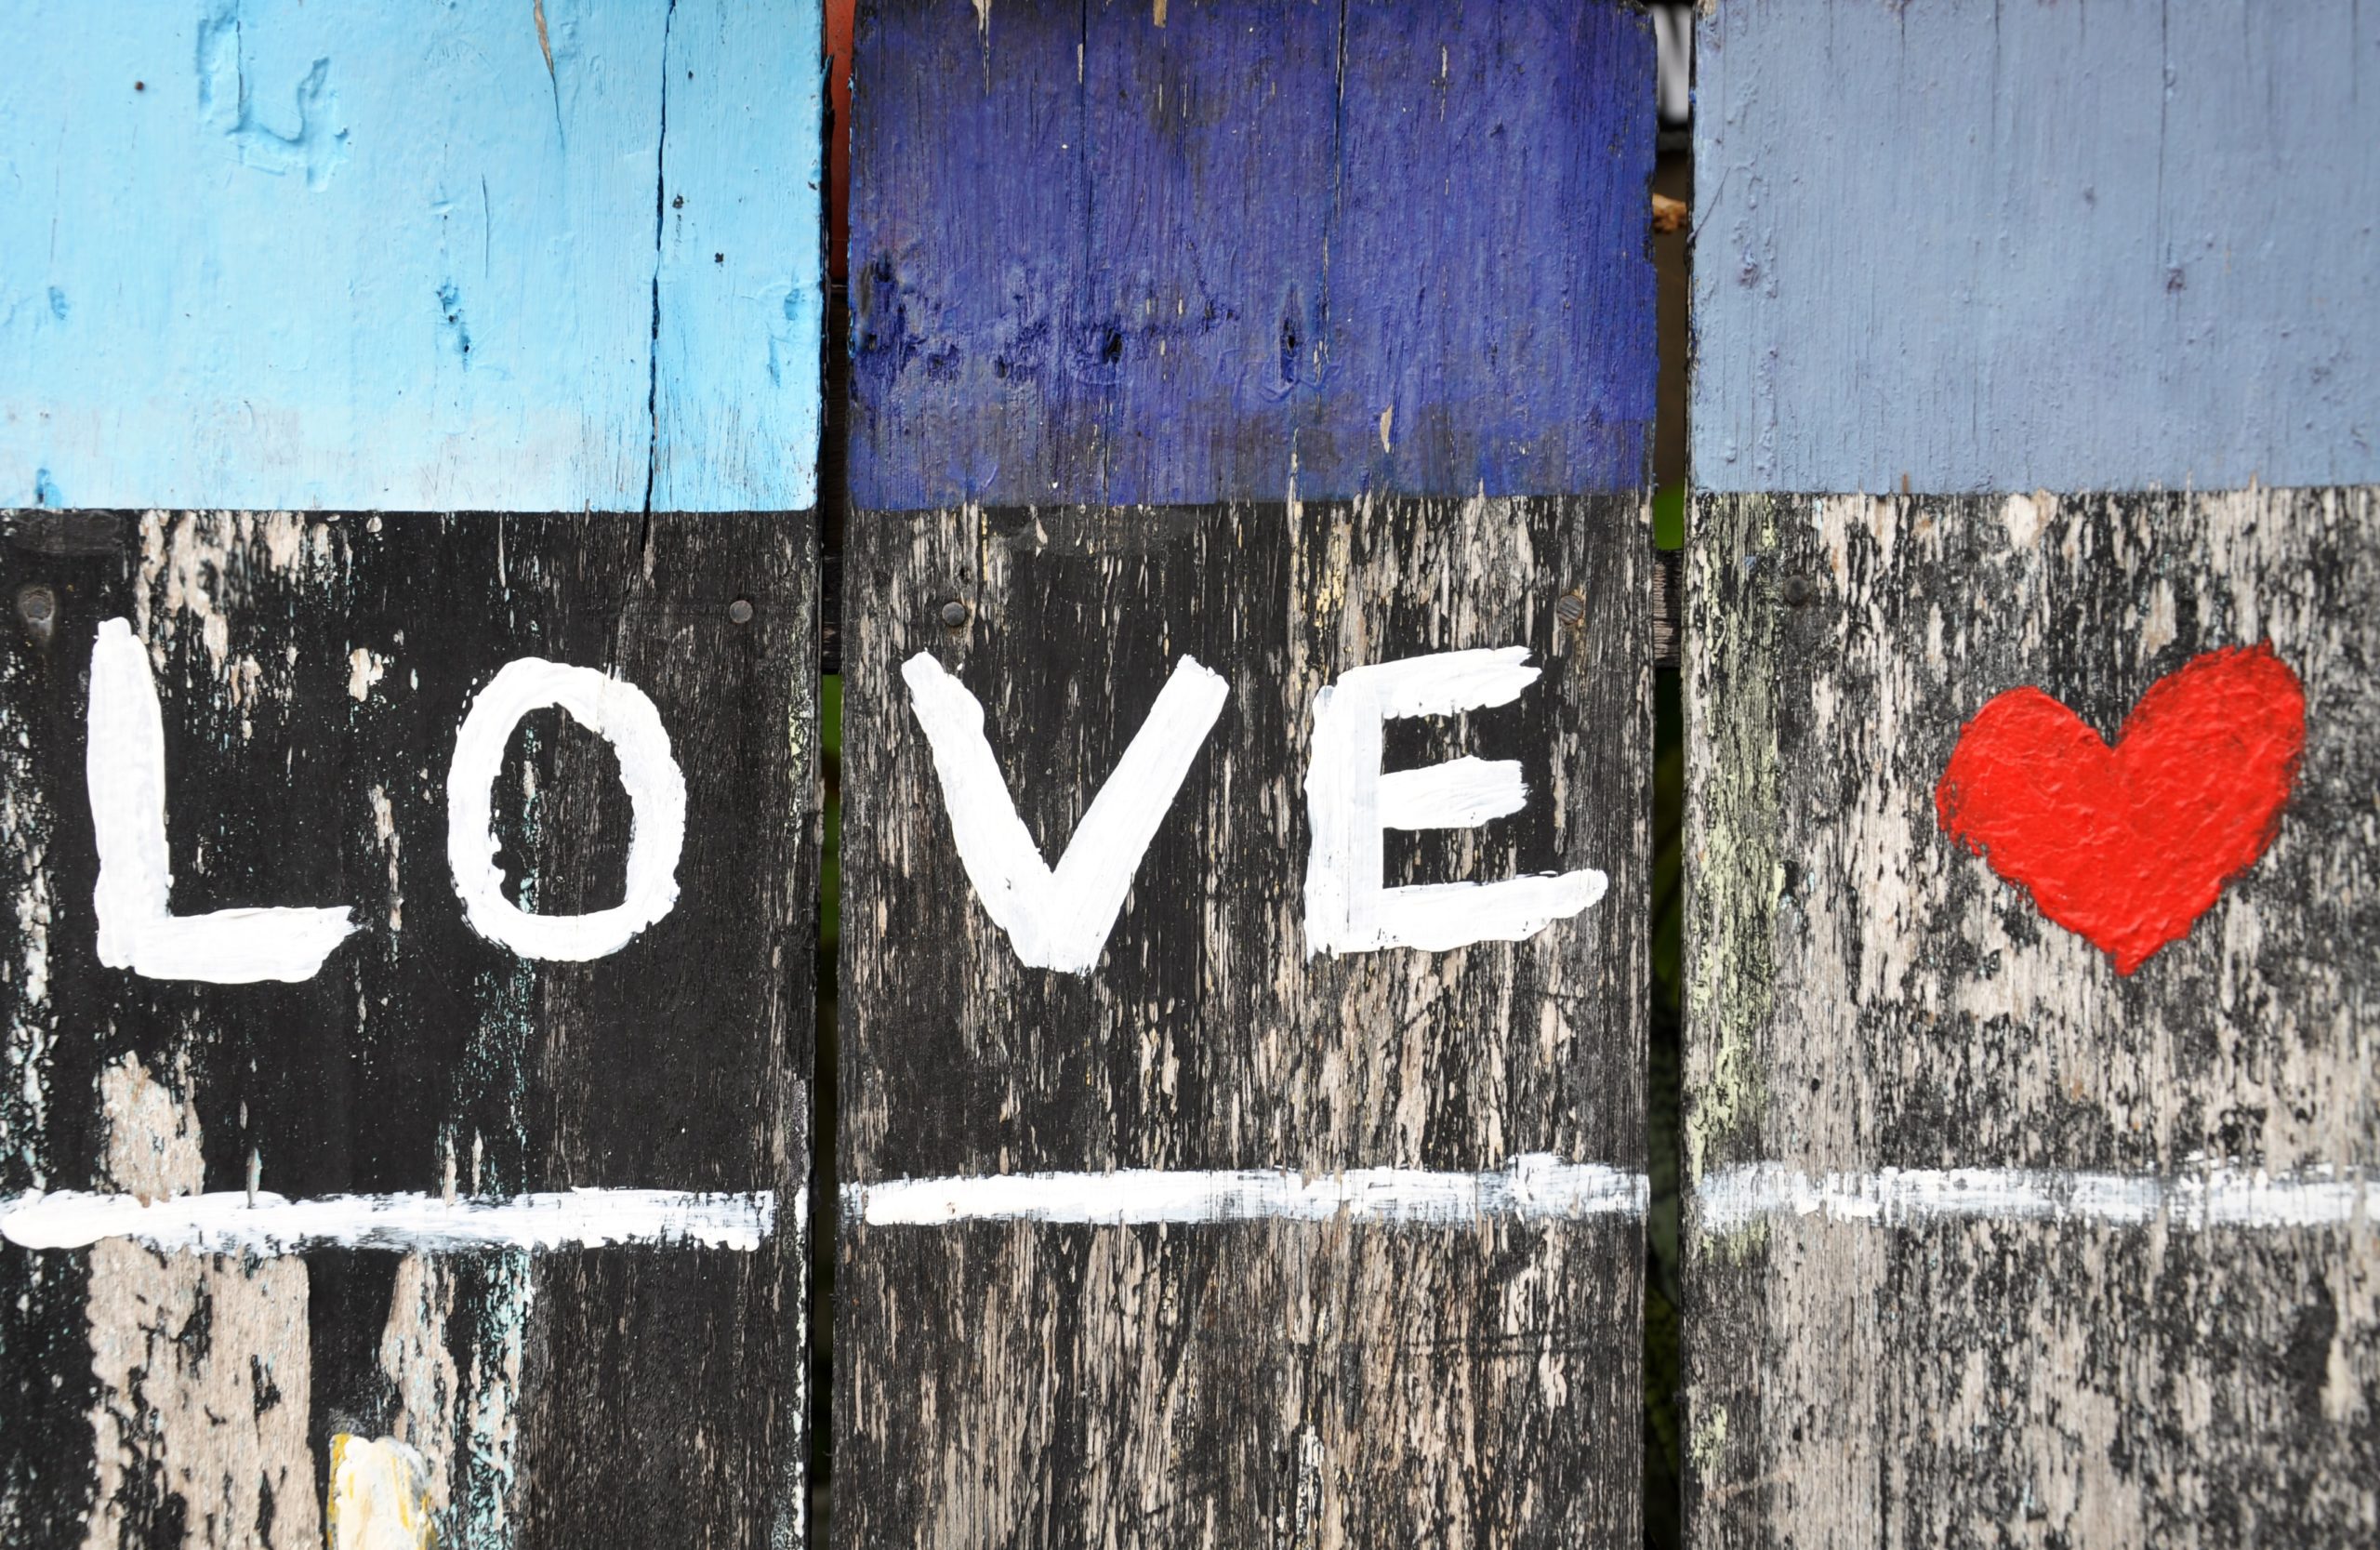 LOVE written in white paint with a red heart on a wooden fence